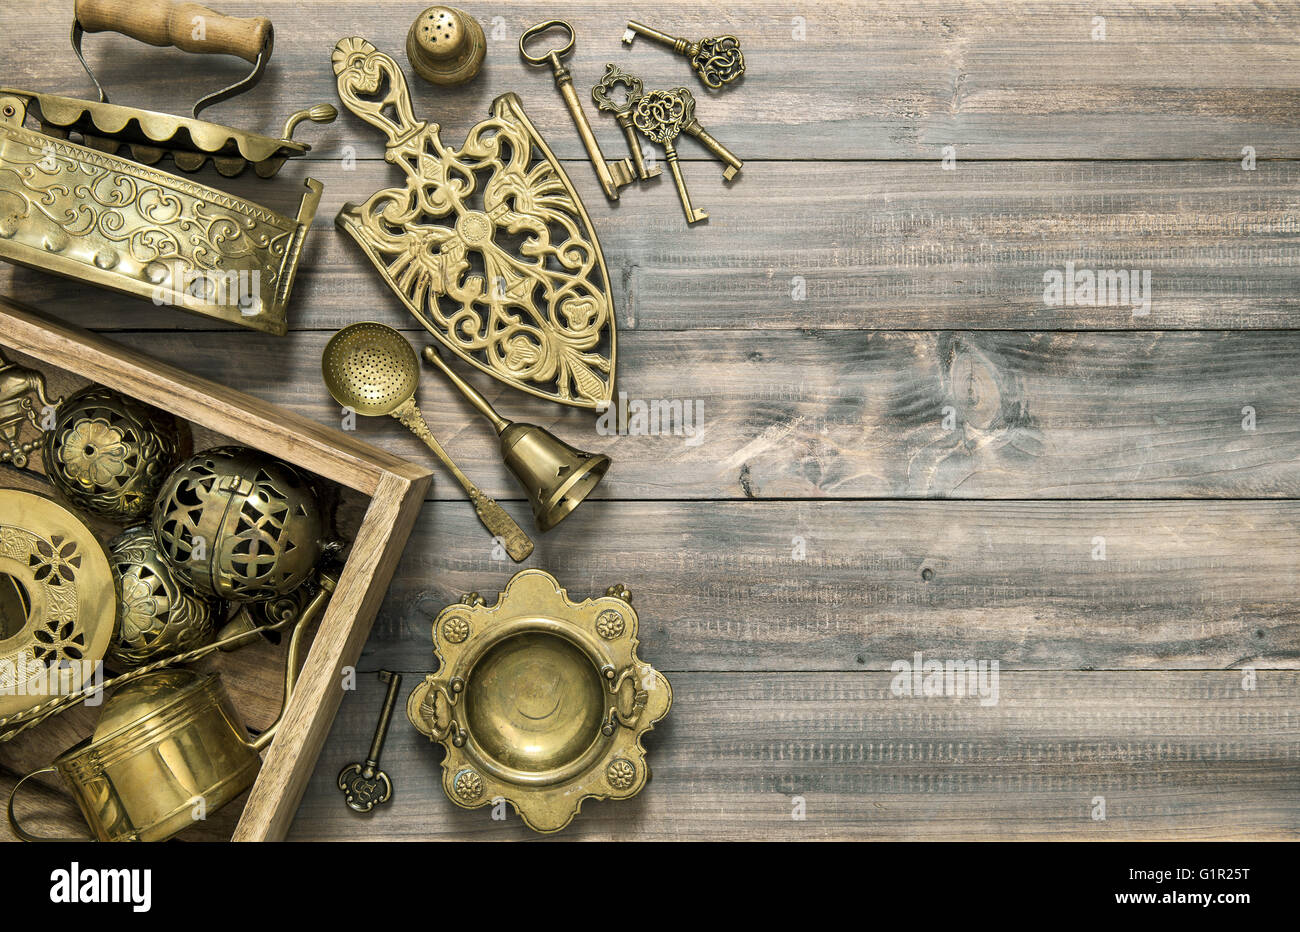 Vintage brass table ware. Kitchen table with antique tools and utensils Stock Photo